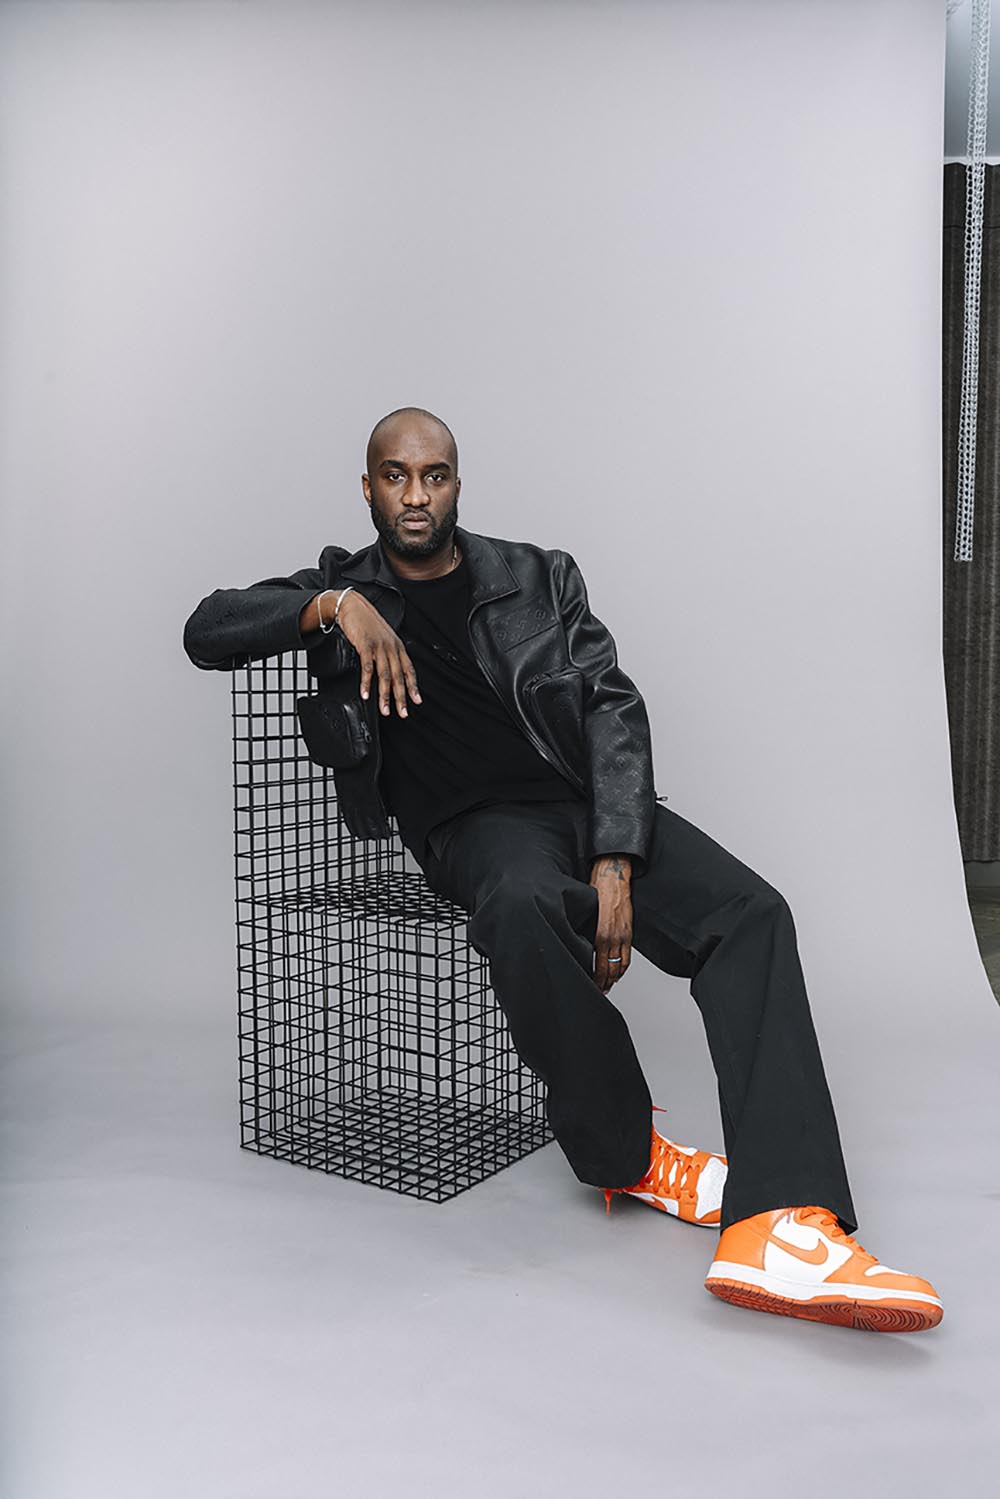 Virgil Abloh's Approach to Fashion - The New York Times